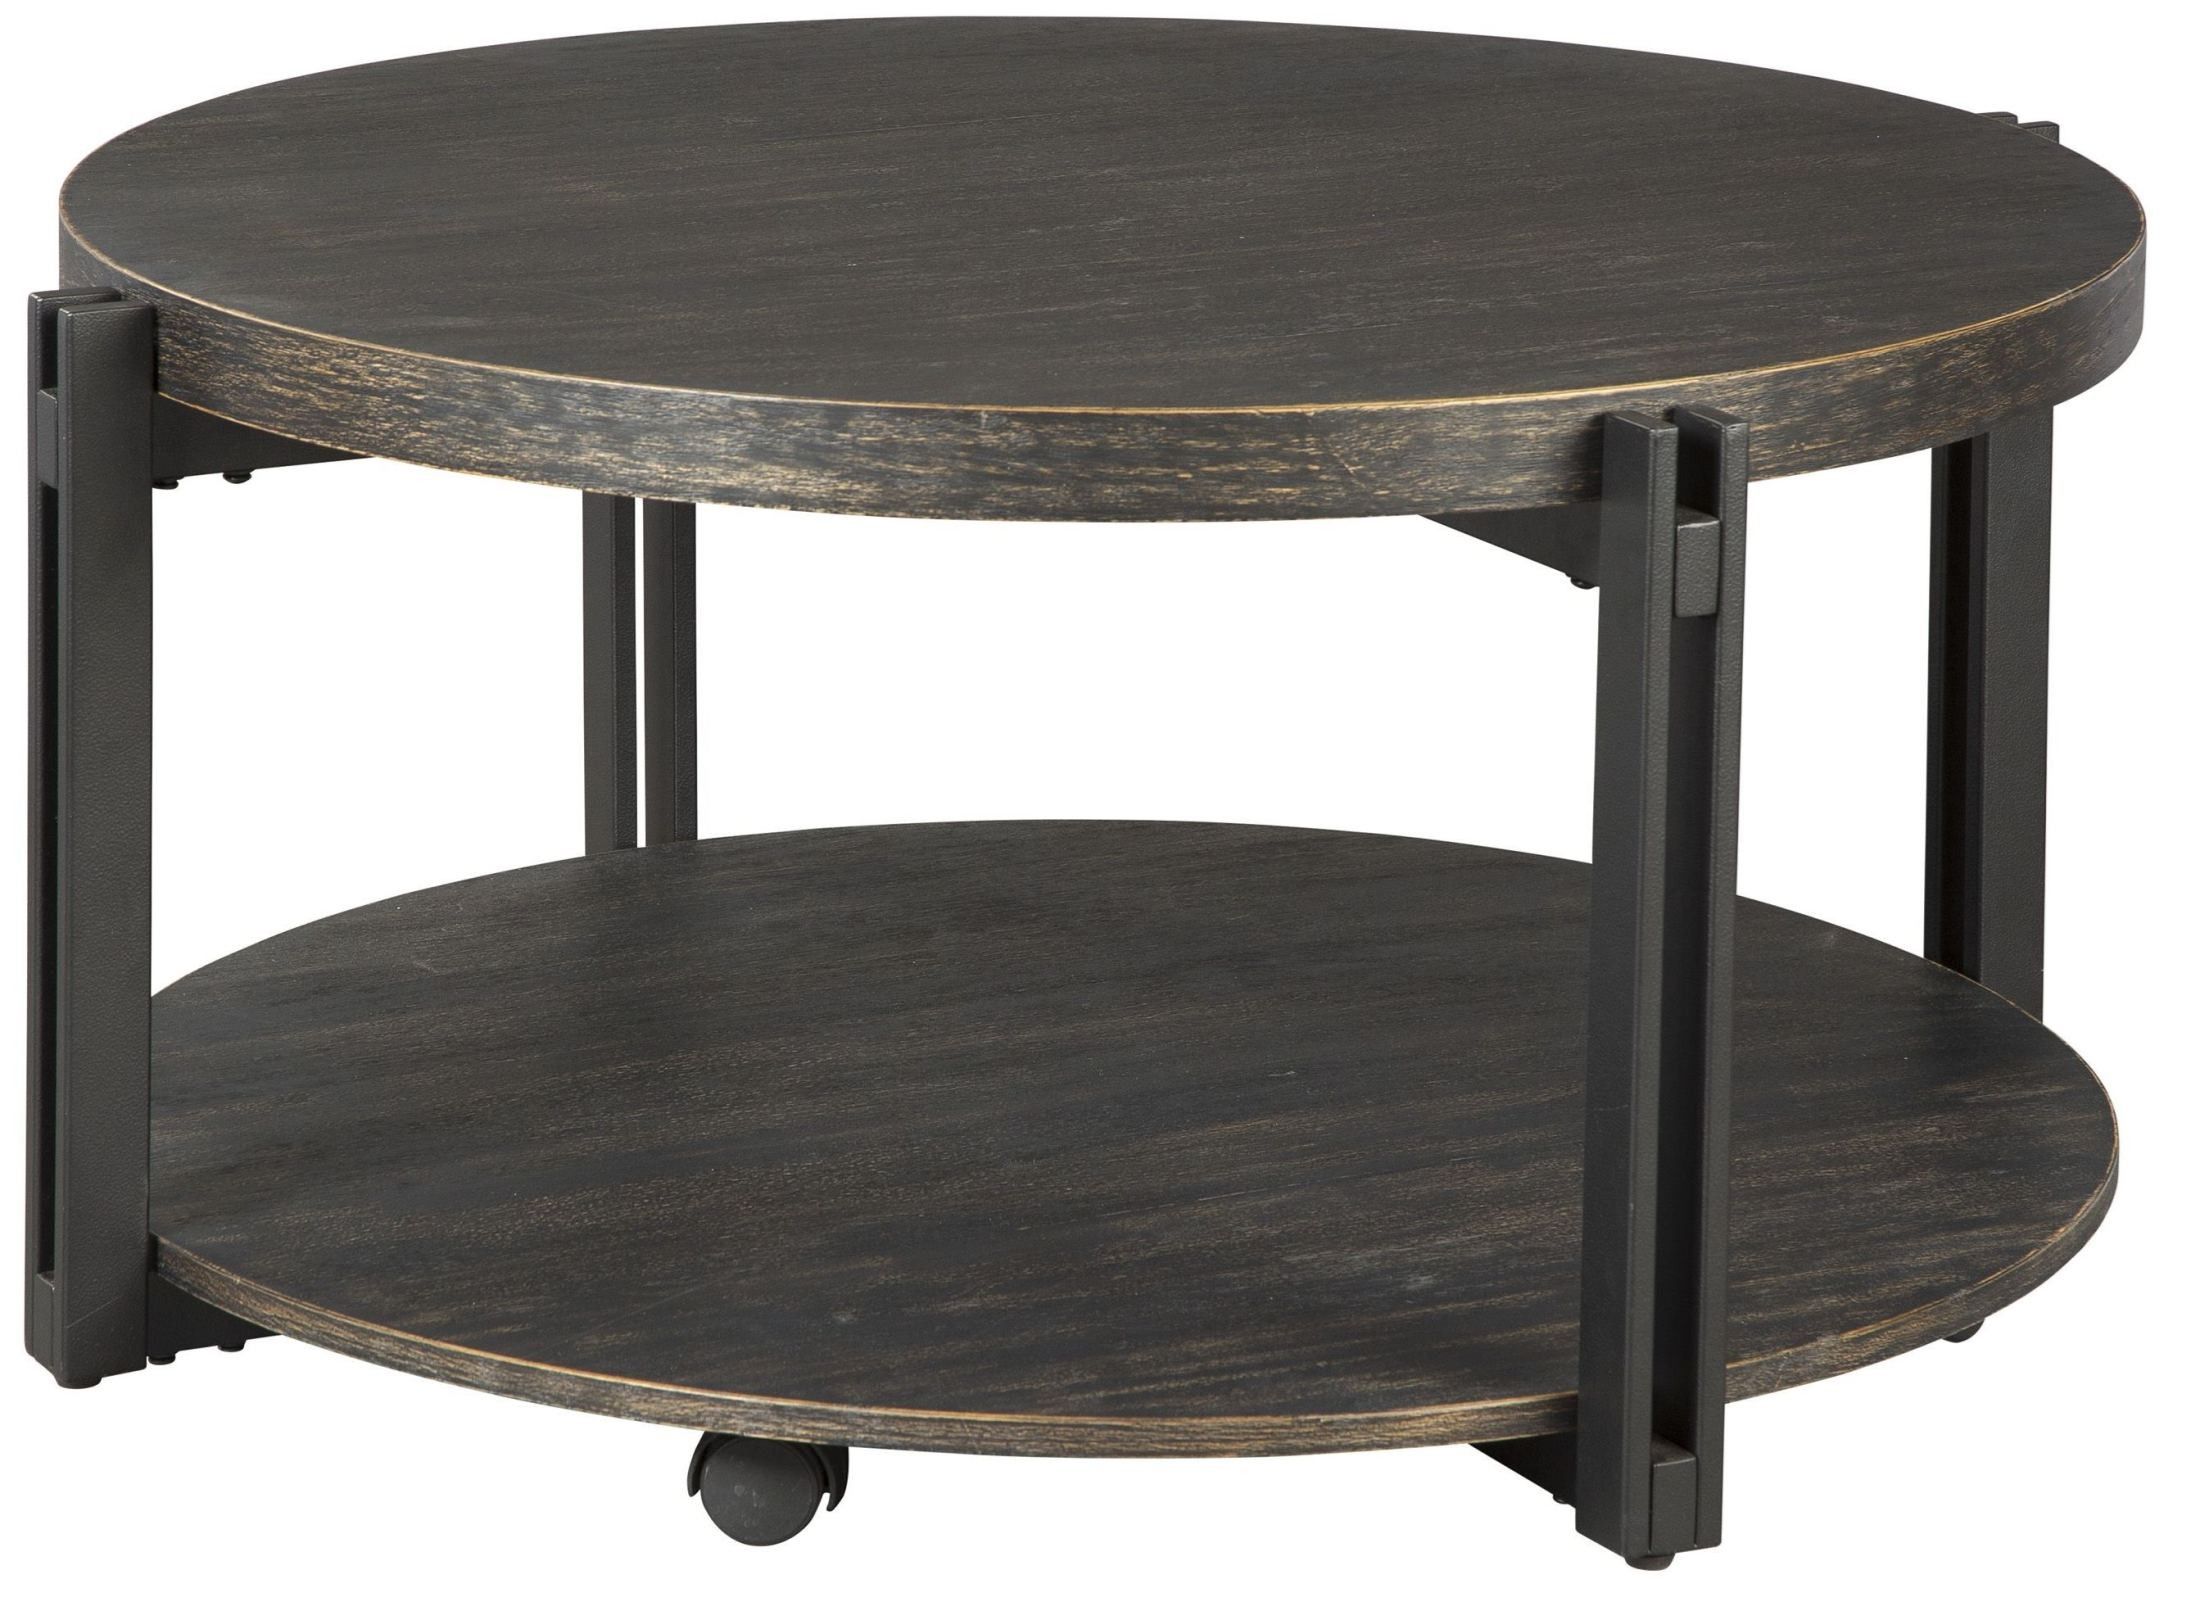 Winnieconi Black Round Cocktail Table, T857 8, Ashley Pertaining To Round Cocktail Tables (View 4 of 15)